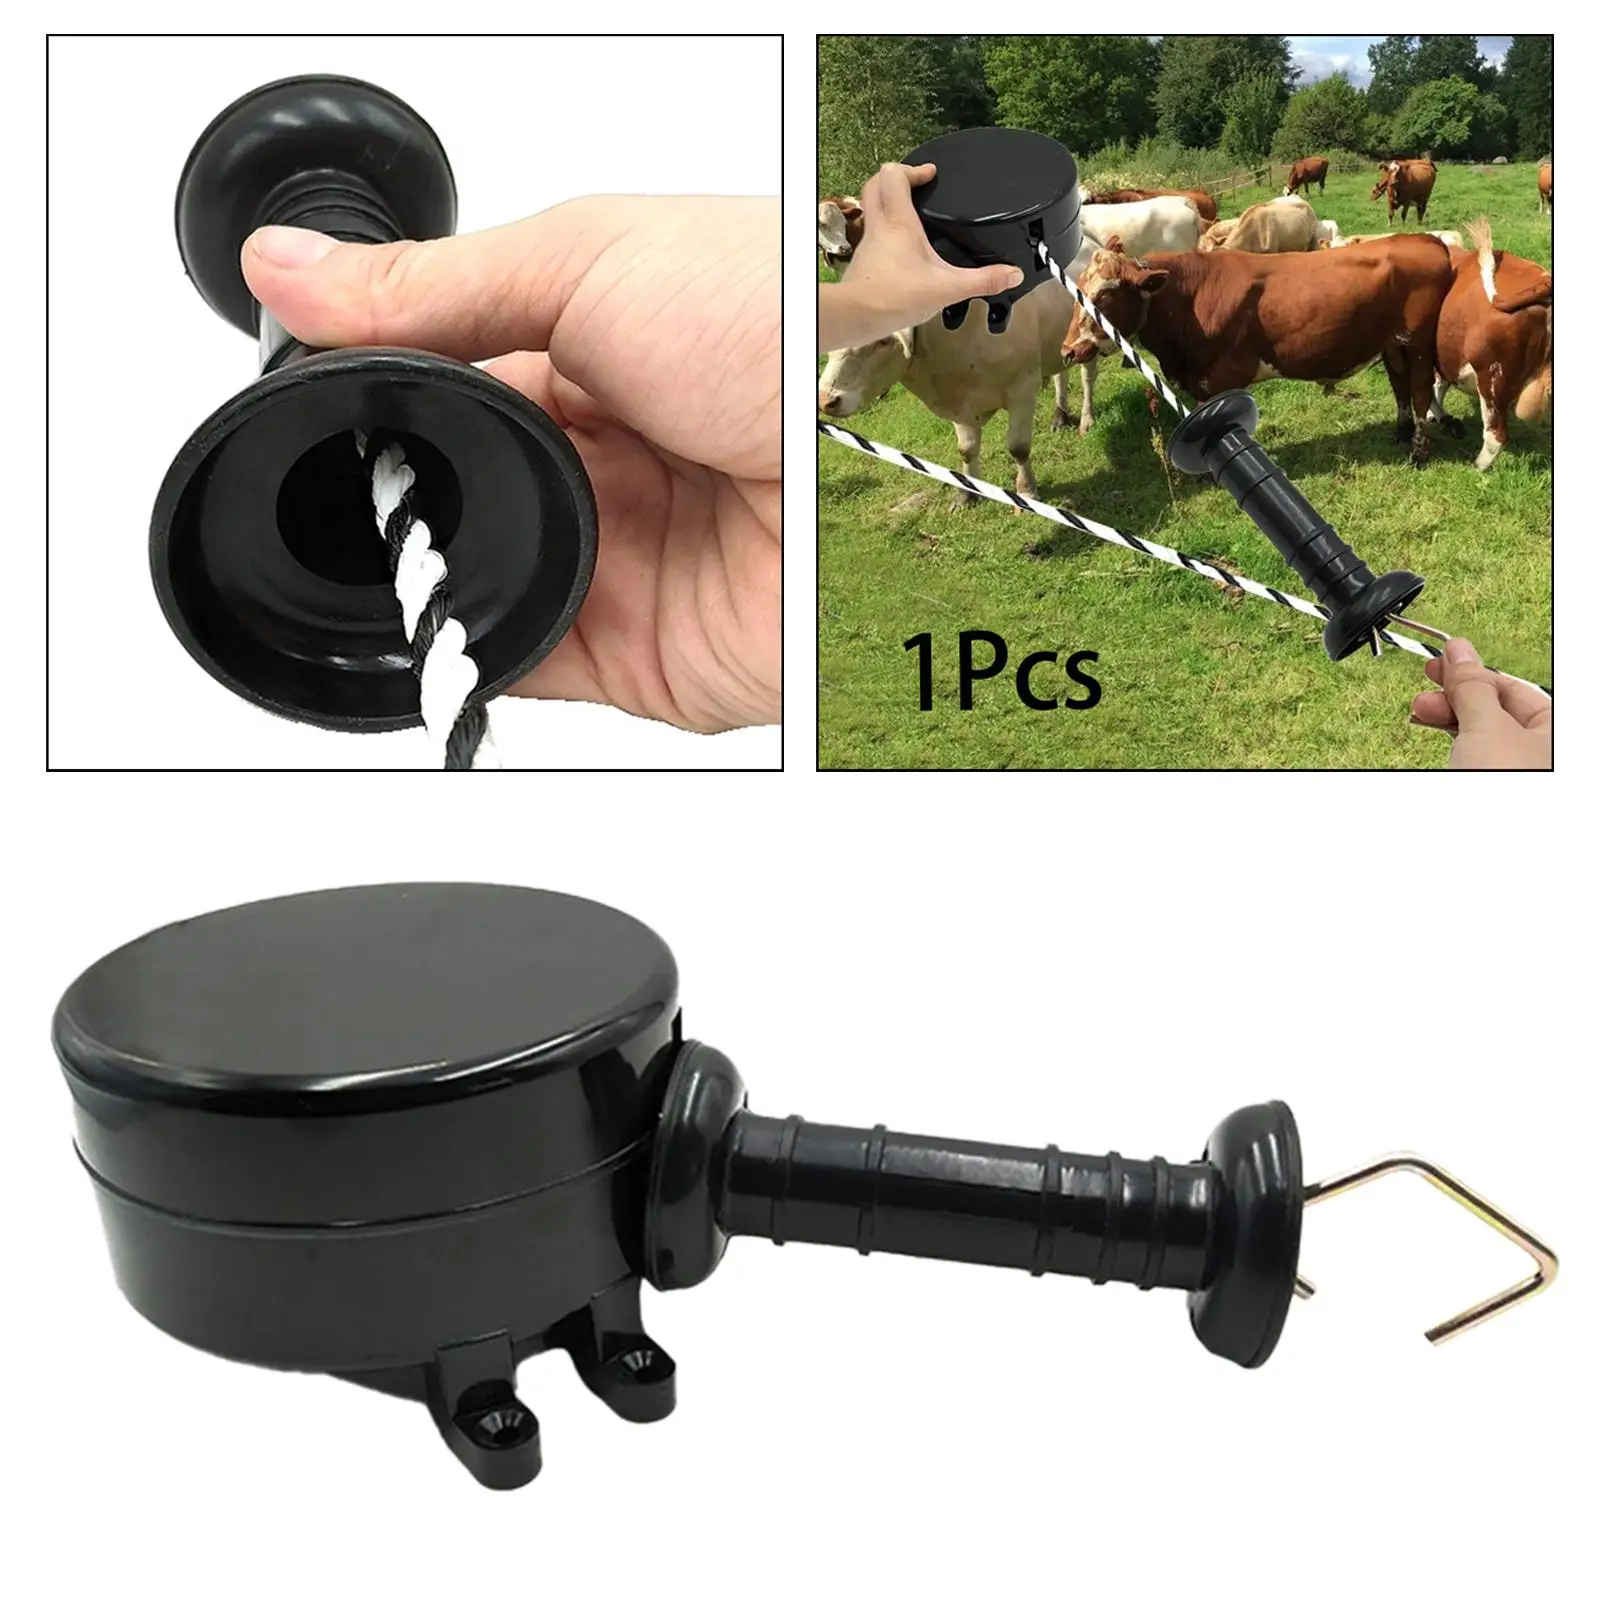 Electric Fence Gate Handle Retractable for Livestock Pasture Garden Ranches